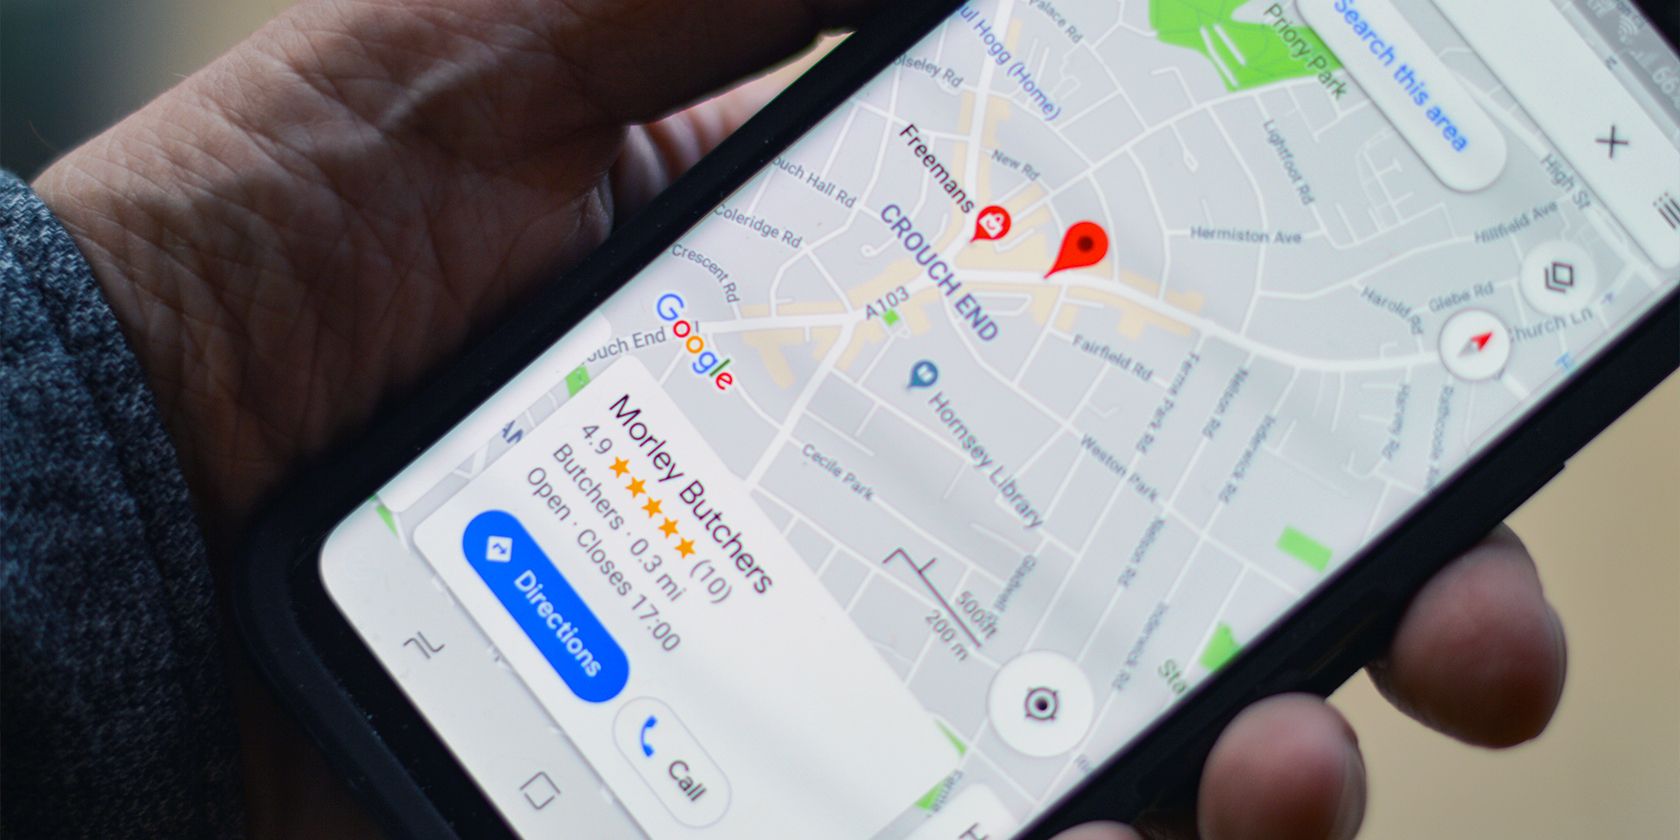 Google Maps Voice Navigation Isn’t Working on Android? Here’s How to Fix It